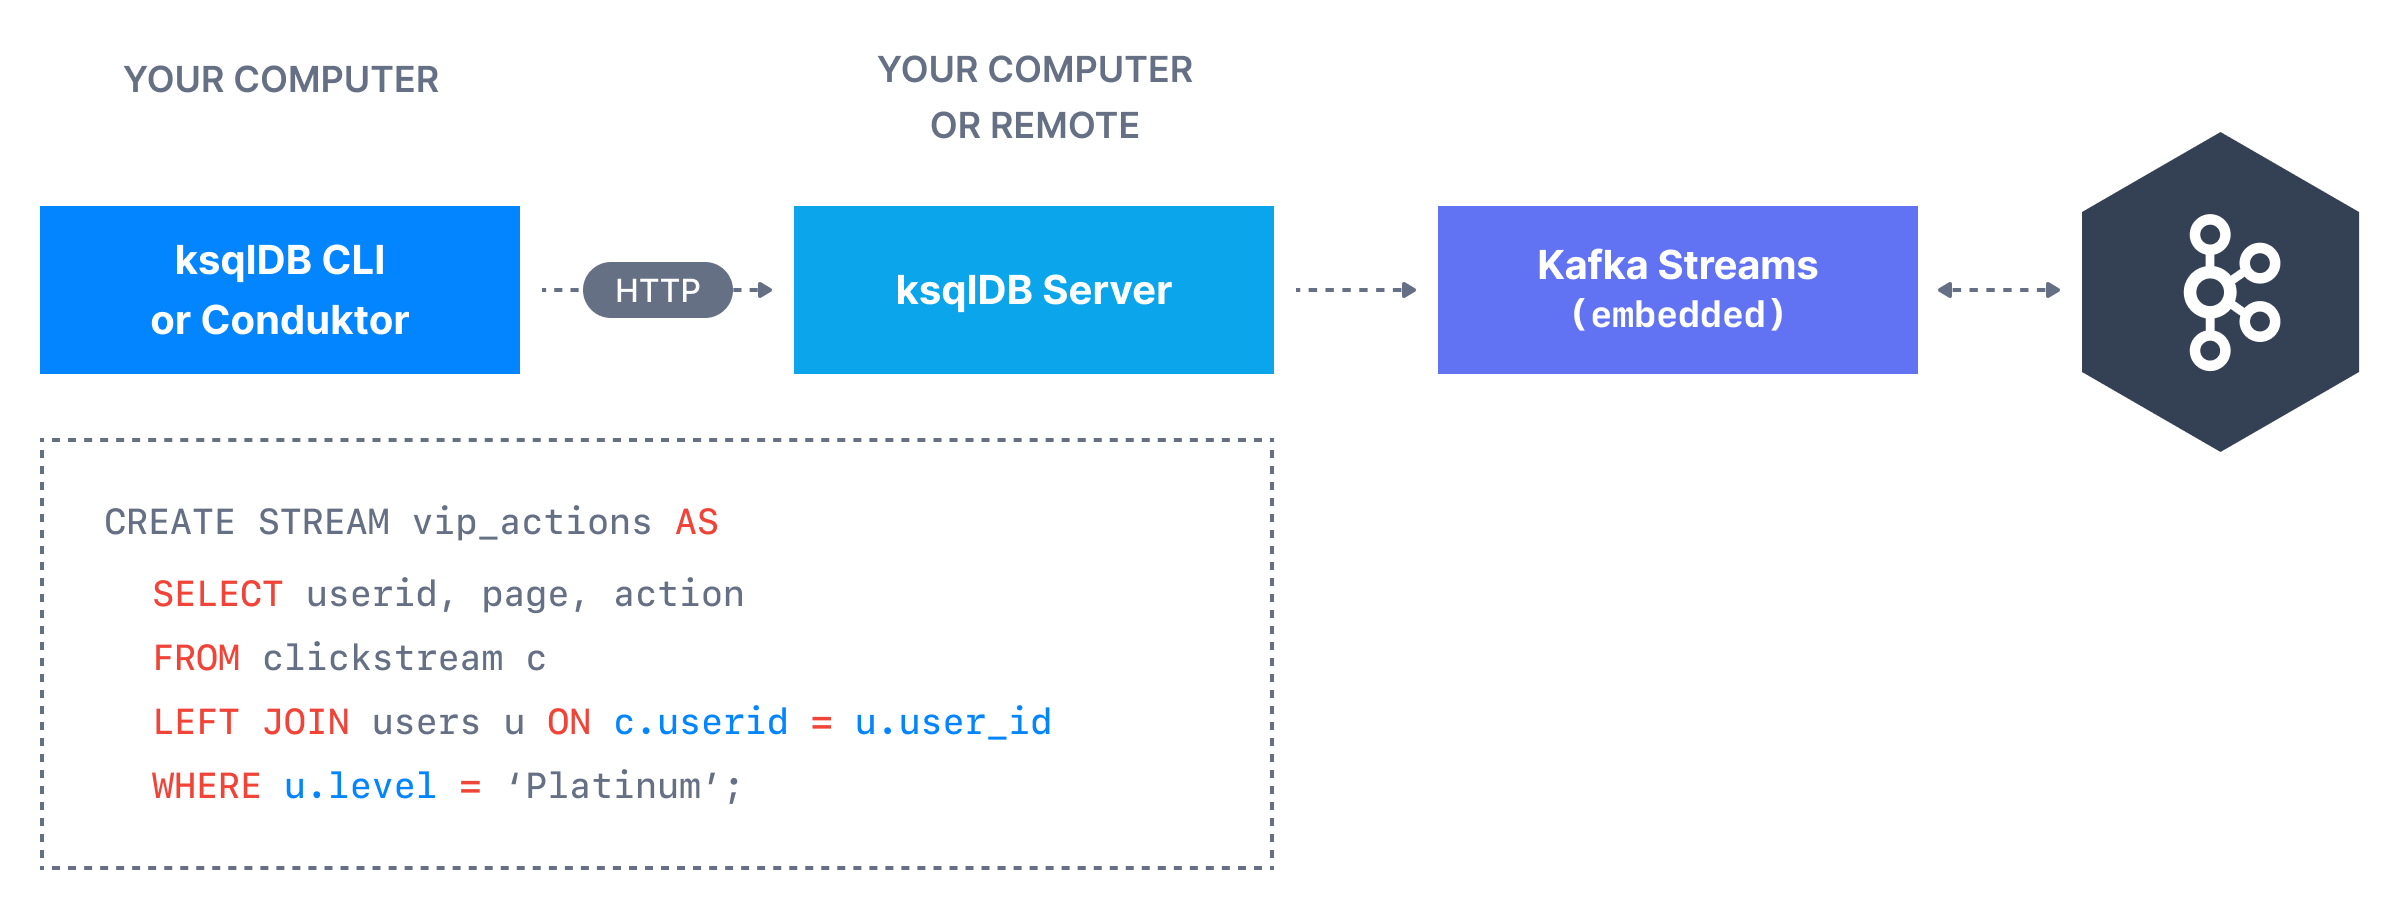 An illustrated overview of how ksqlDB works with Apache Kafka